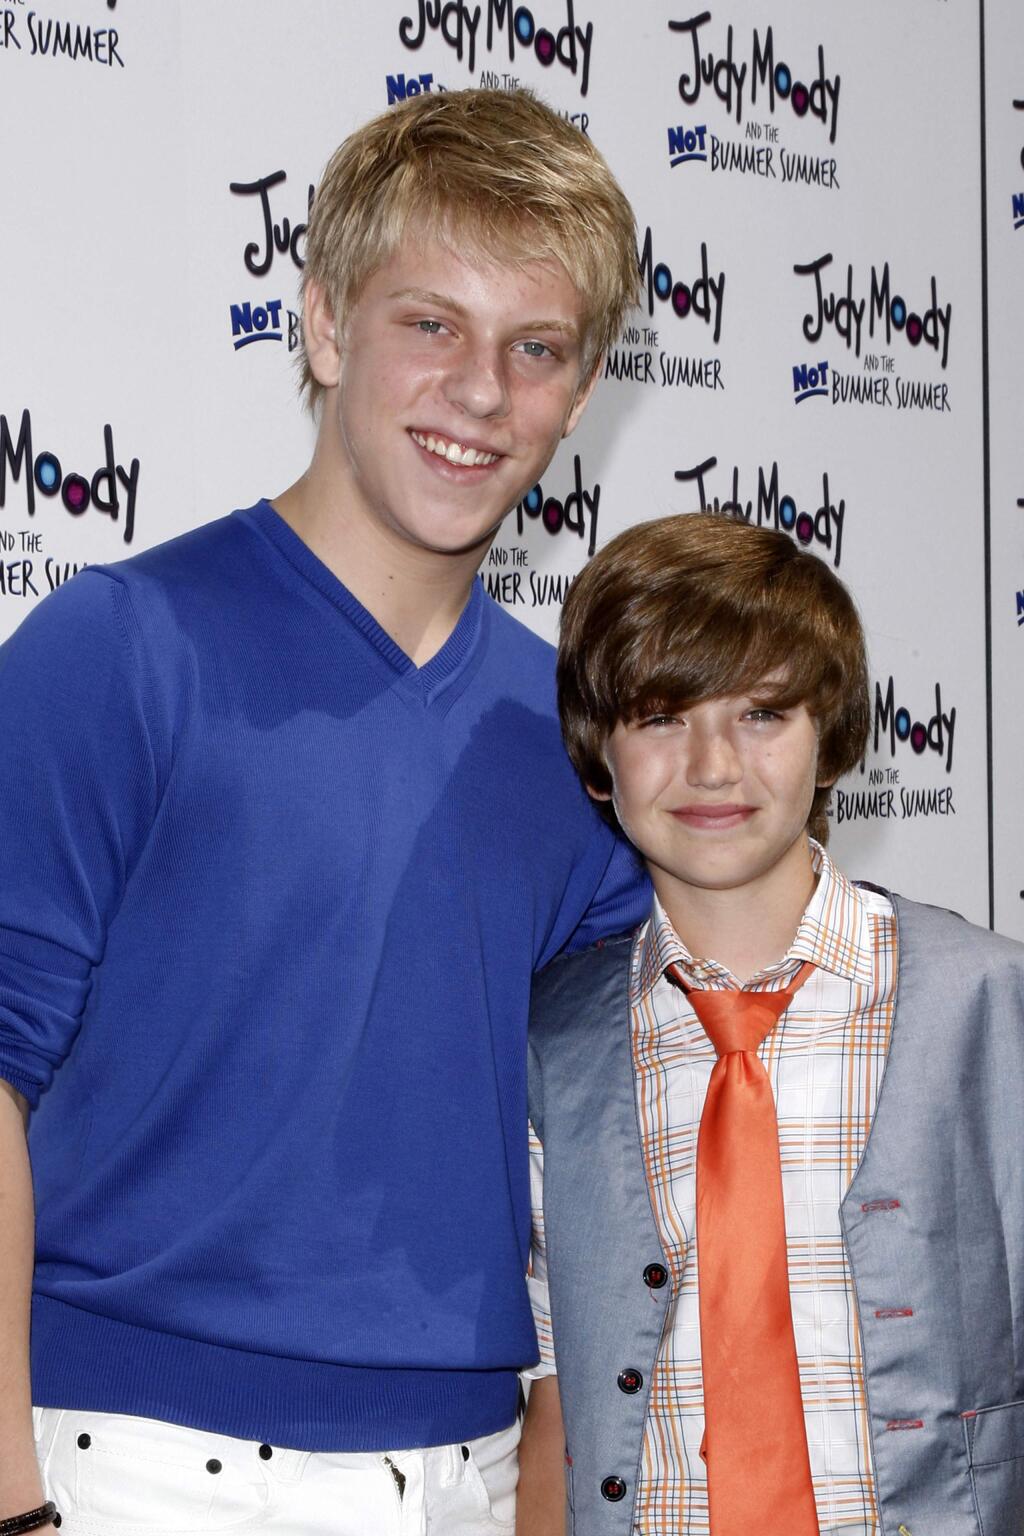 Jackson Odell and Garrett Ryan at 'Judy Moody And The NOT Bummer Summer' premiere at ArcLight Hollywood on June 4, 2011 in Los Angeles, California. (KATHY HUTCHINS/ SHUTTERSTOCK)